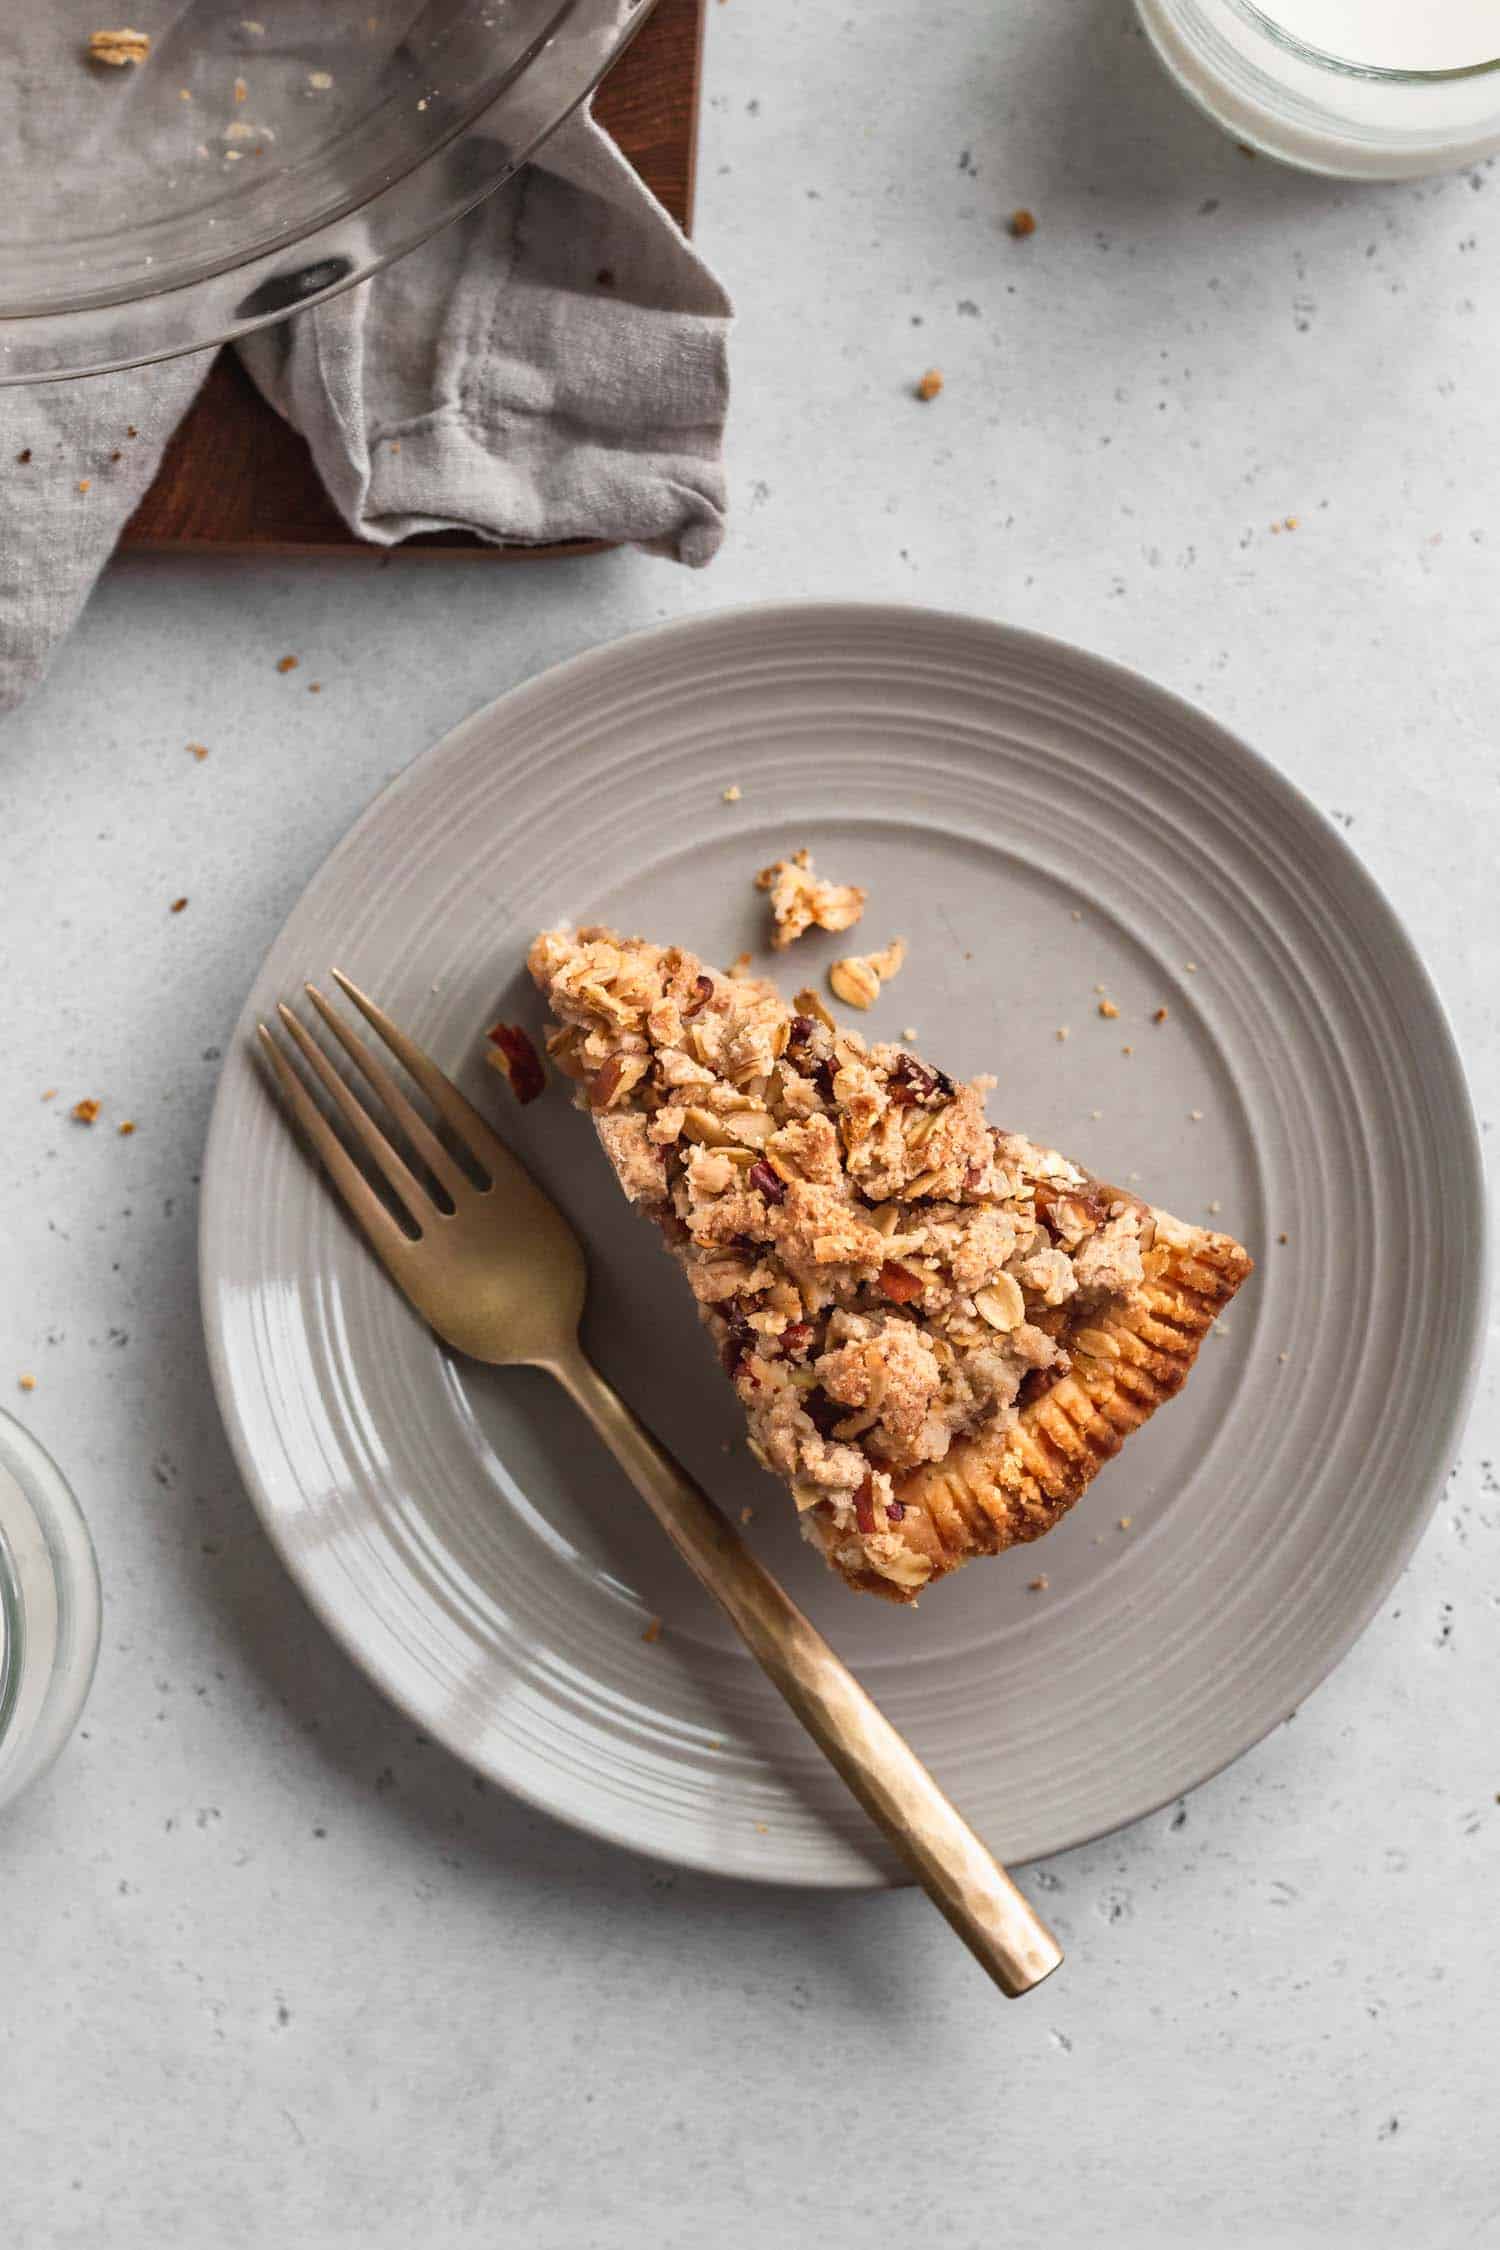 A slice of pie on a plate with a golden fork